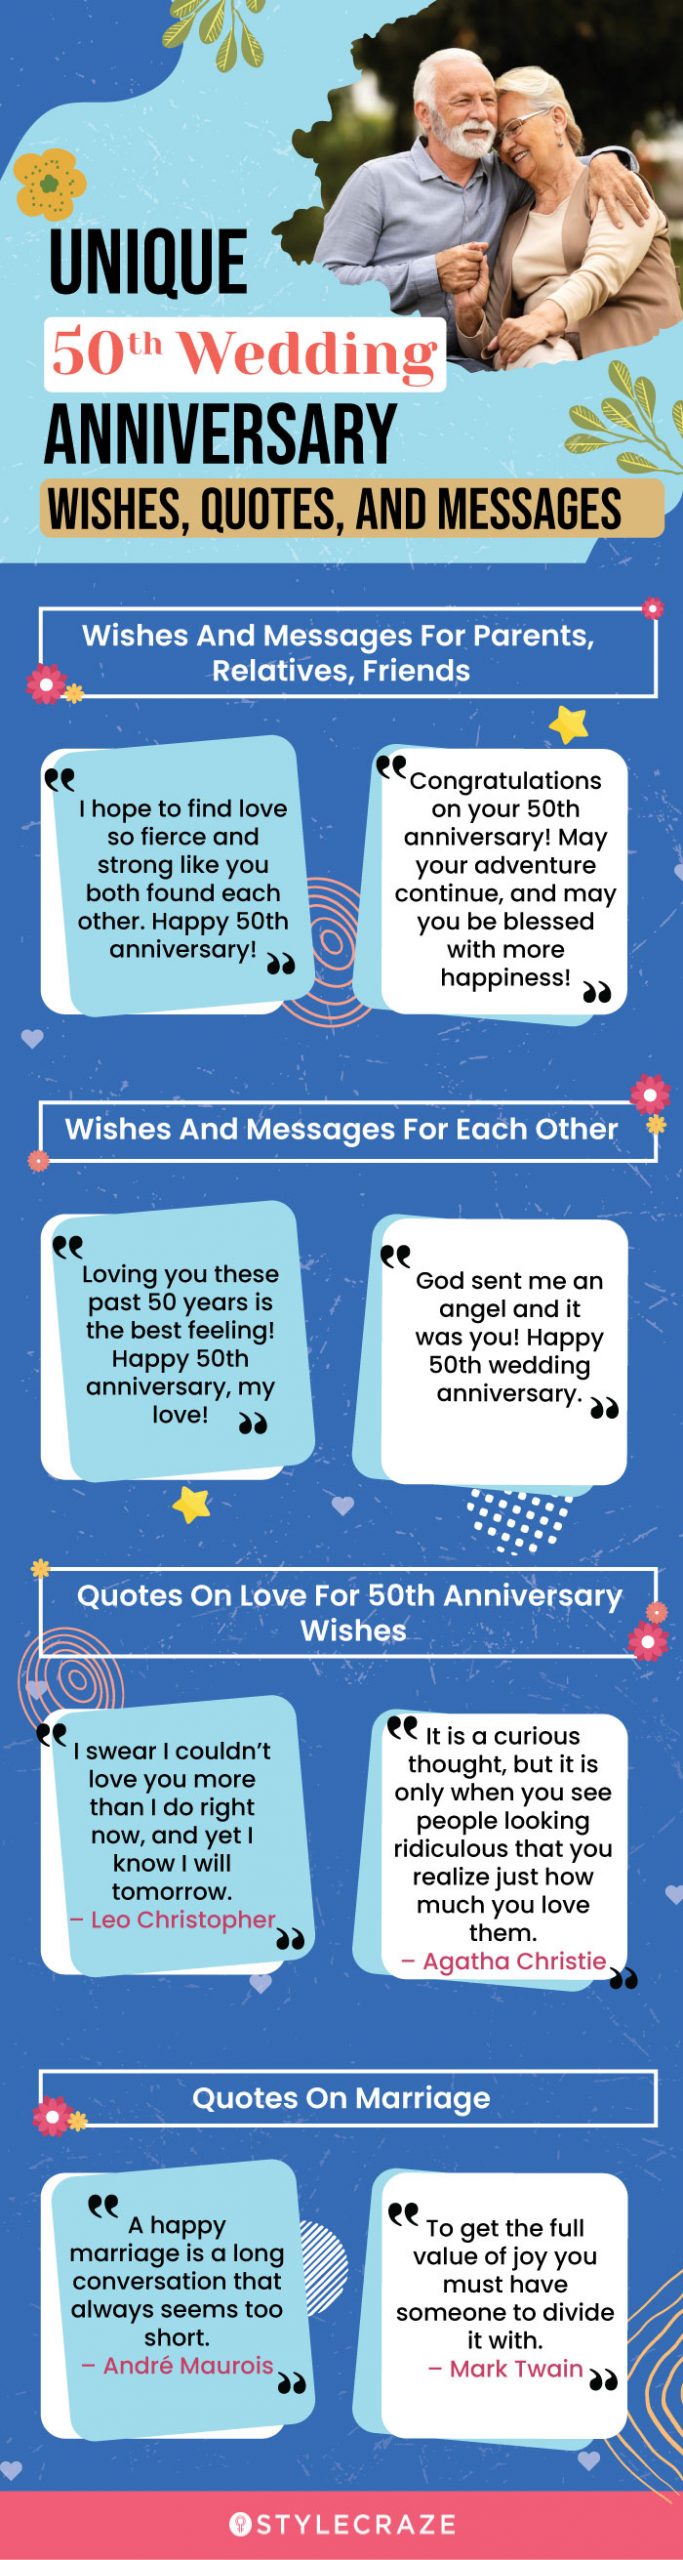 unique 50th wedding anniversary wishes, quotes, and messages (infographic)